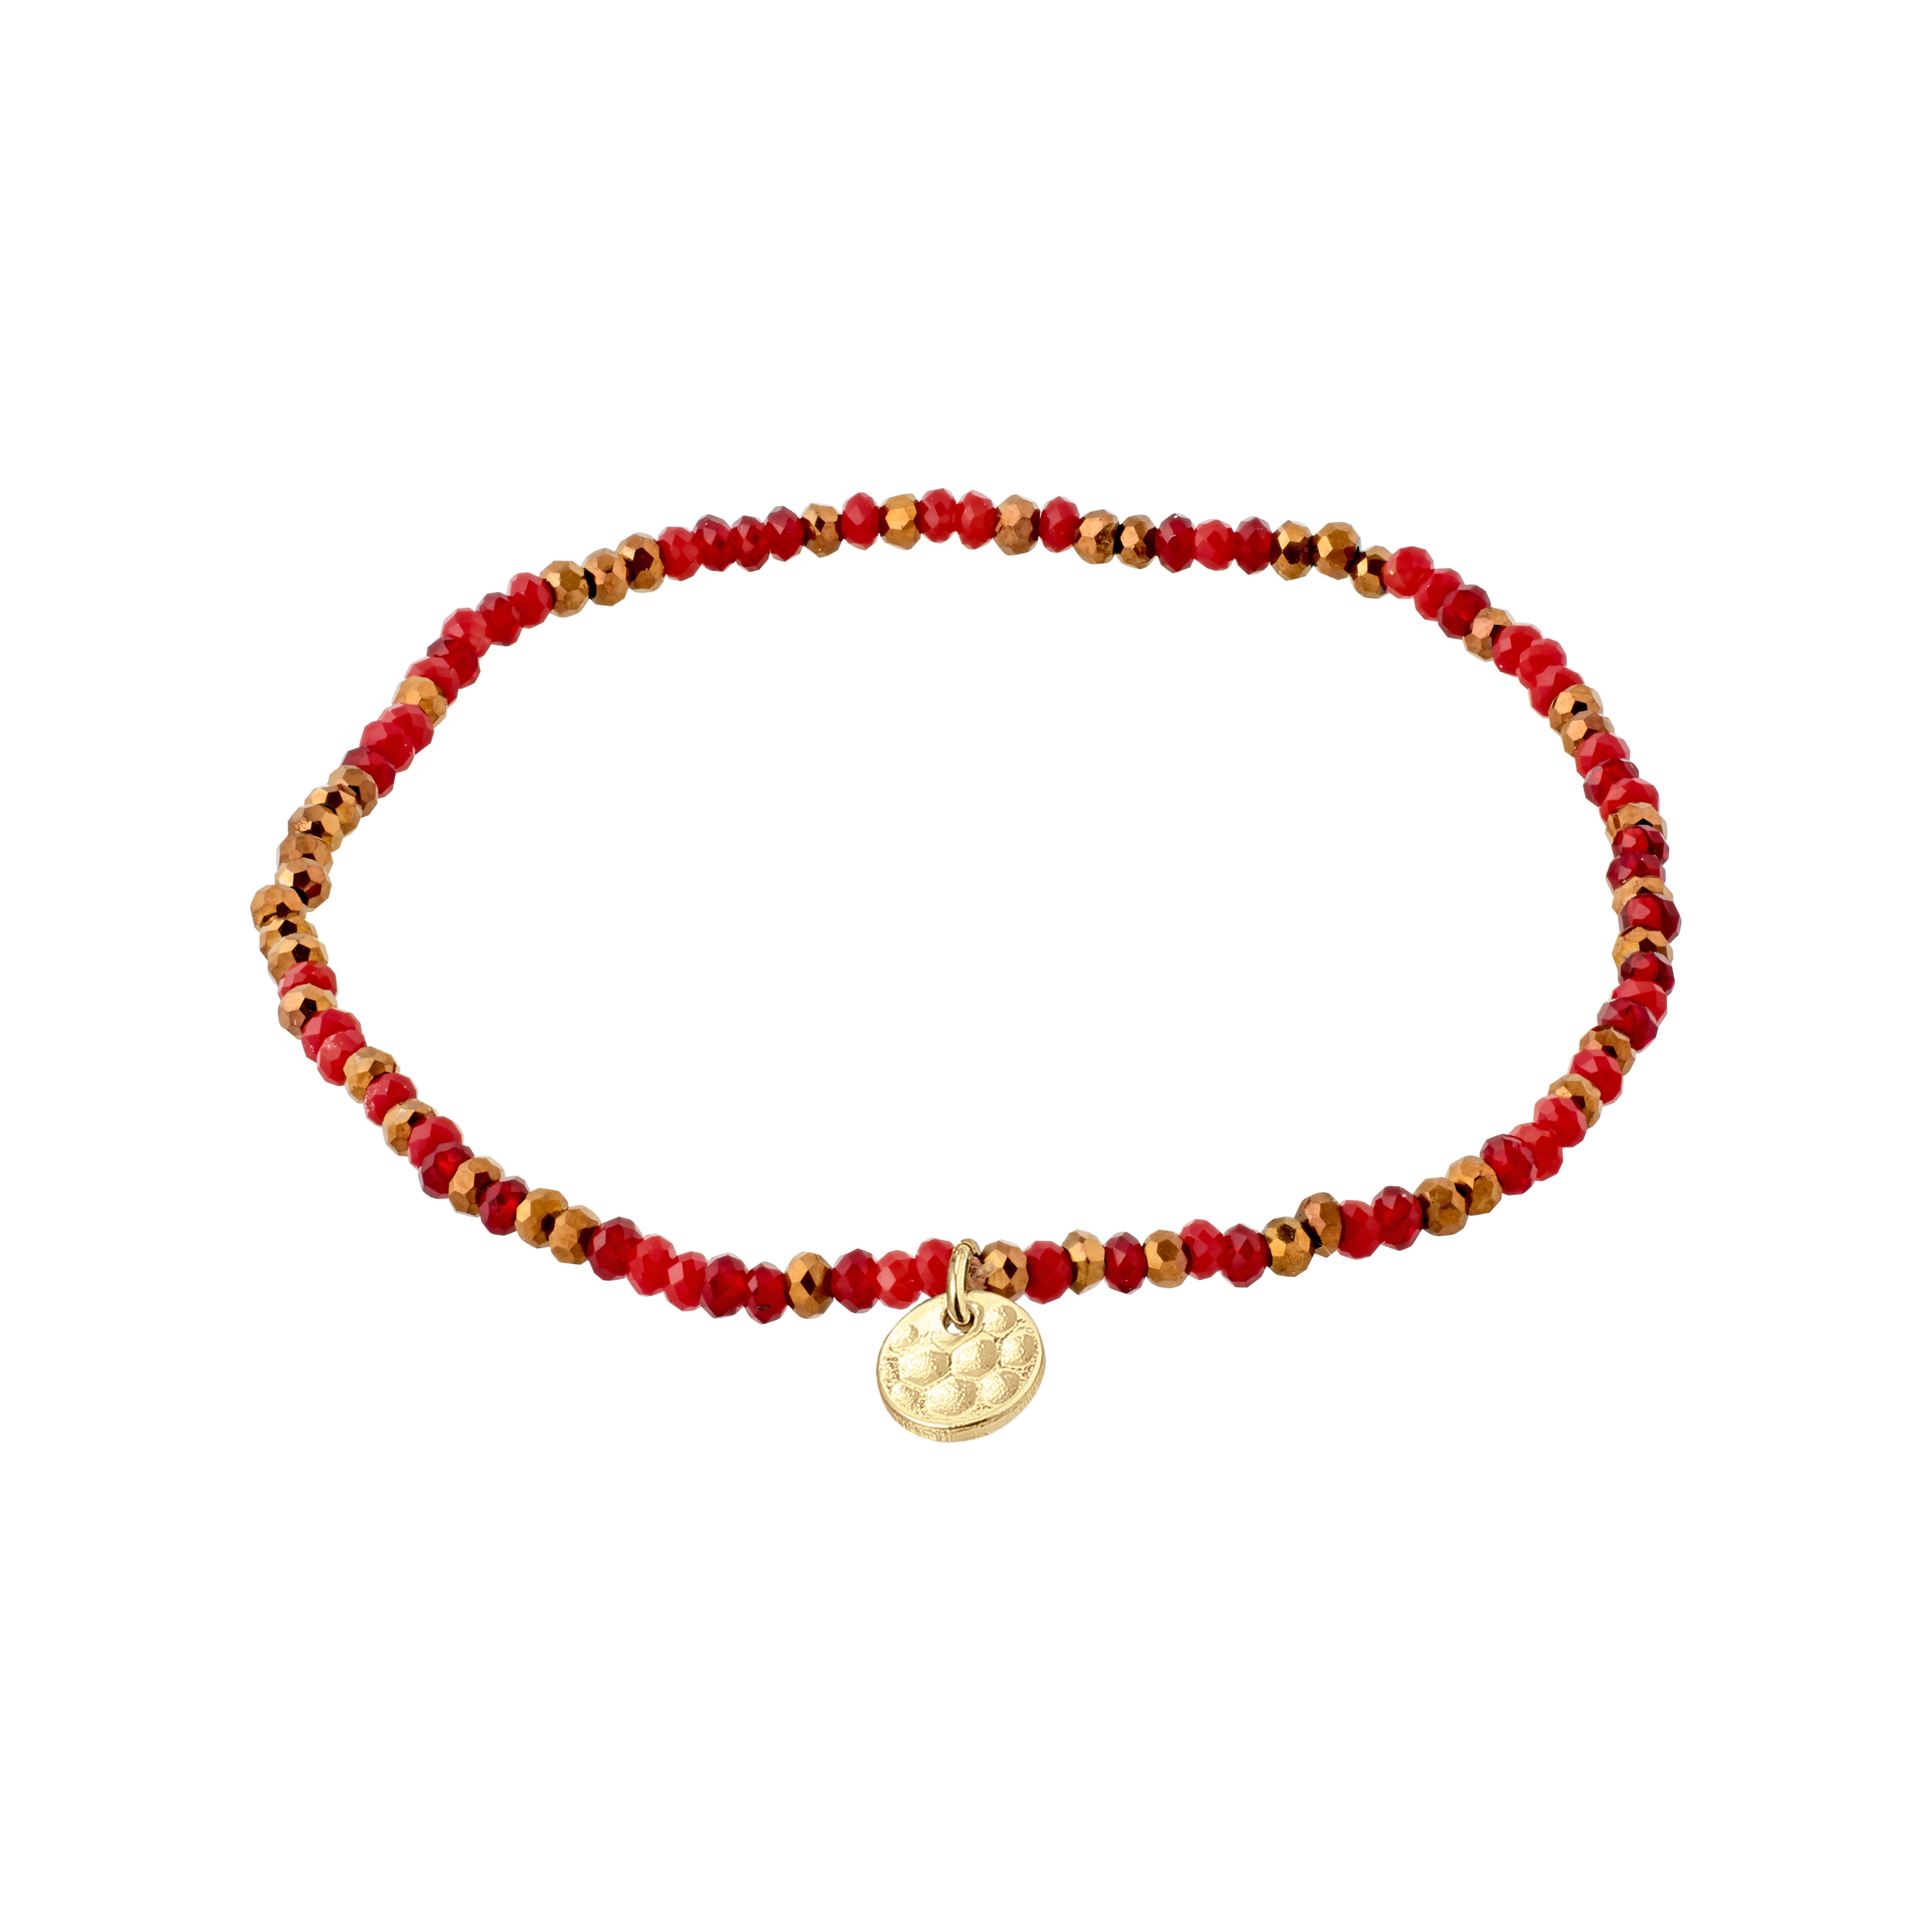 INDIE bracelet red, gold-plated